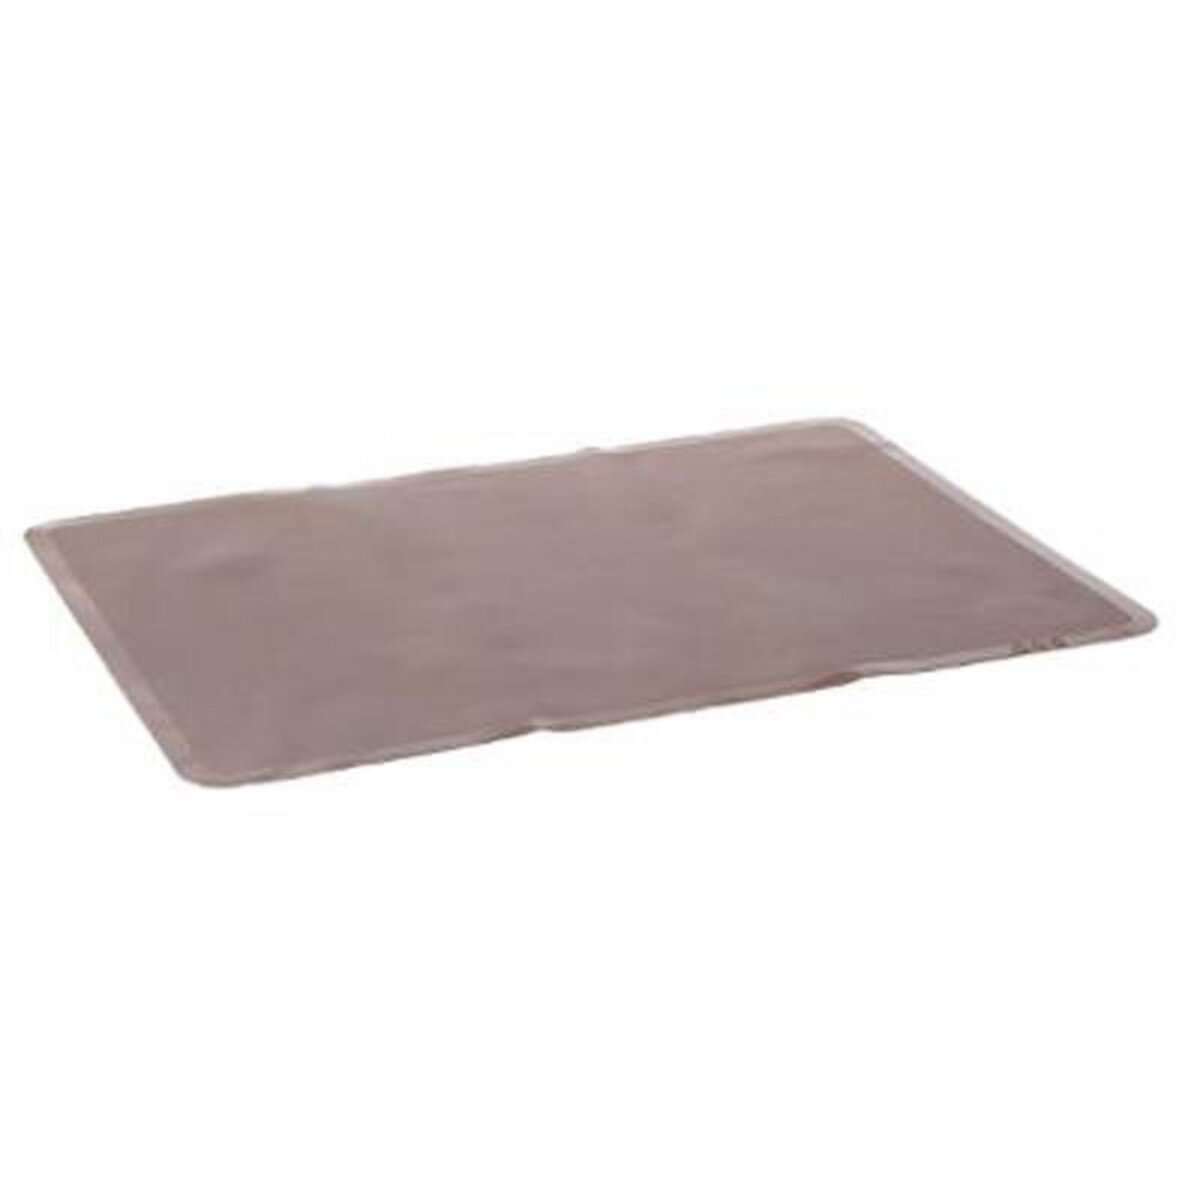  Feuille de Cuisson Silicone  Gourmand  38cm Taupe